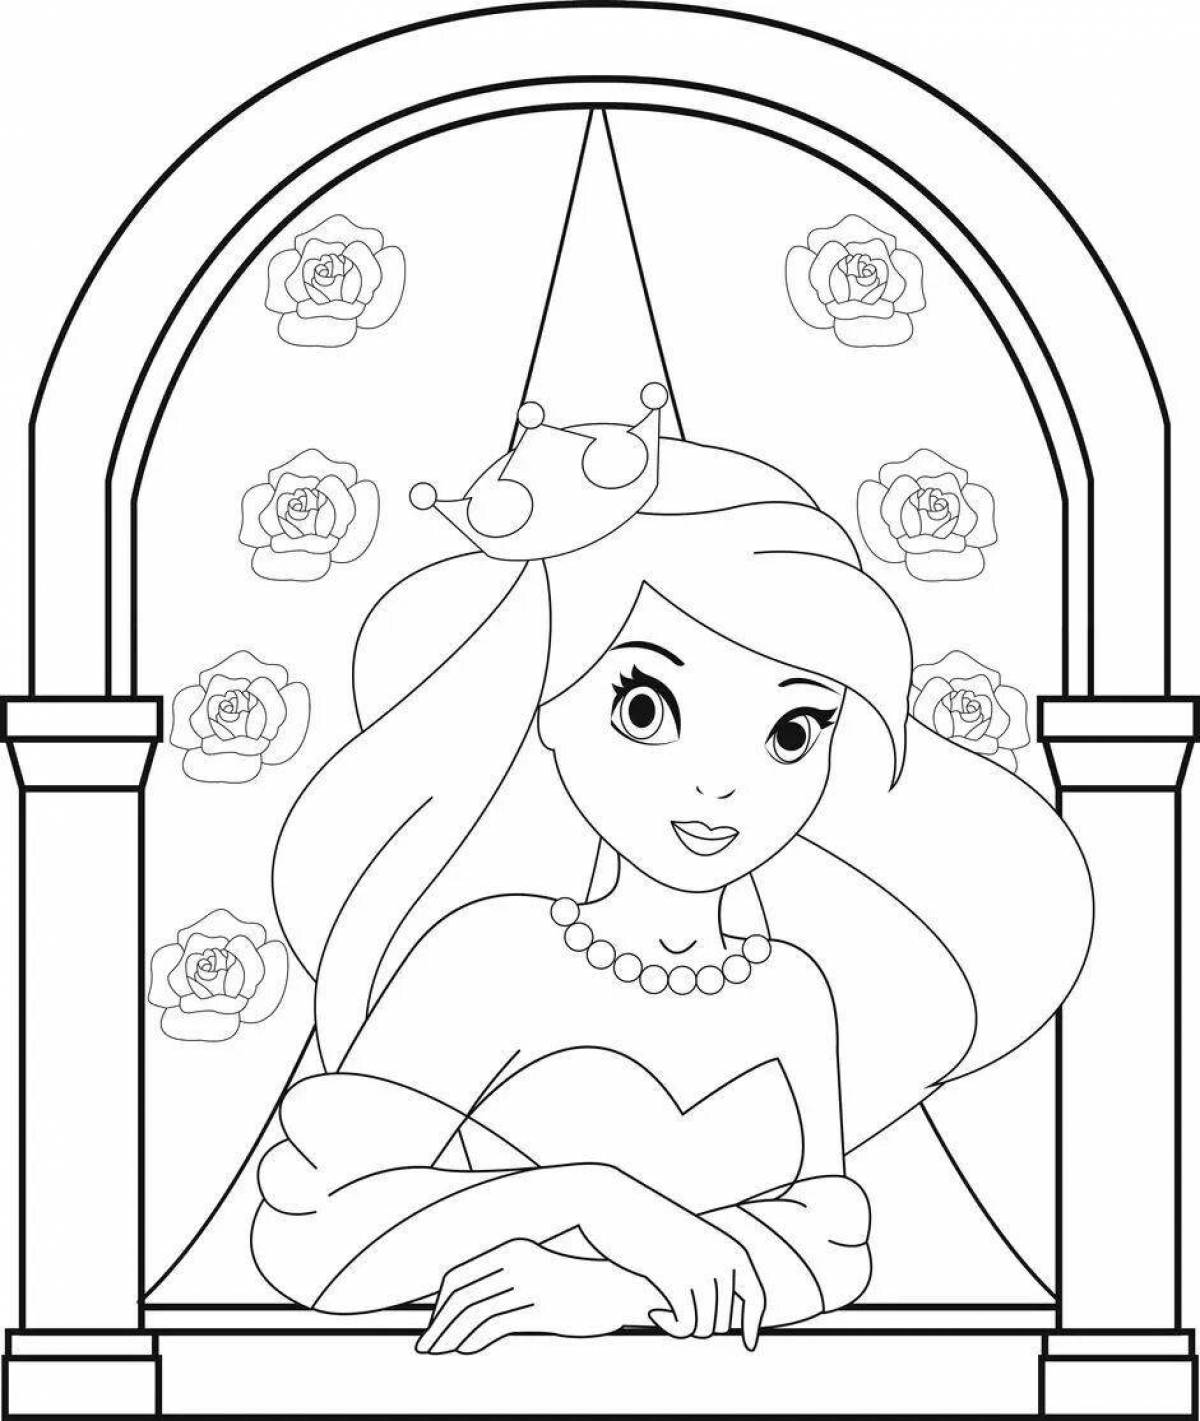 Gorgeous Castle coloring book for girls